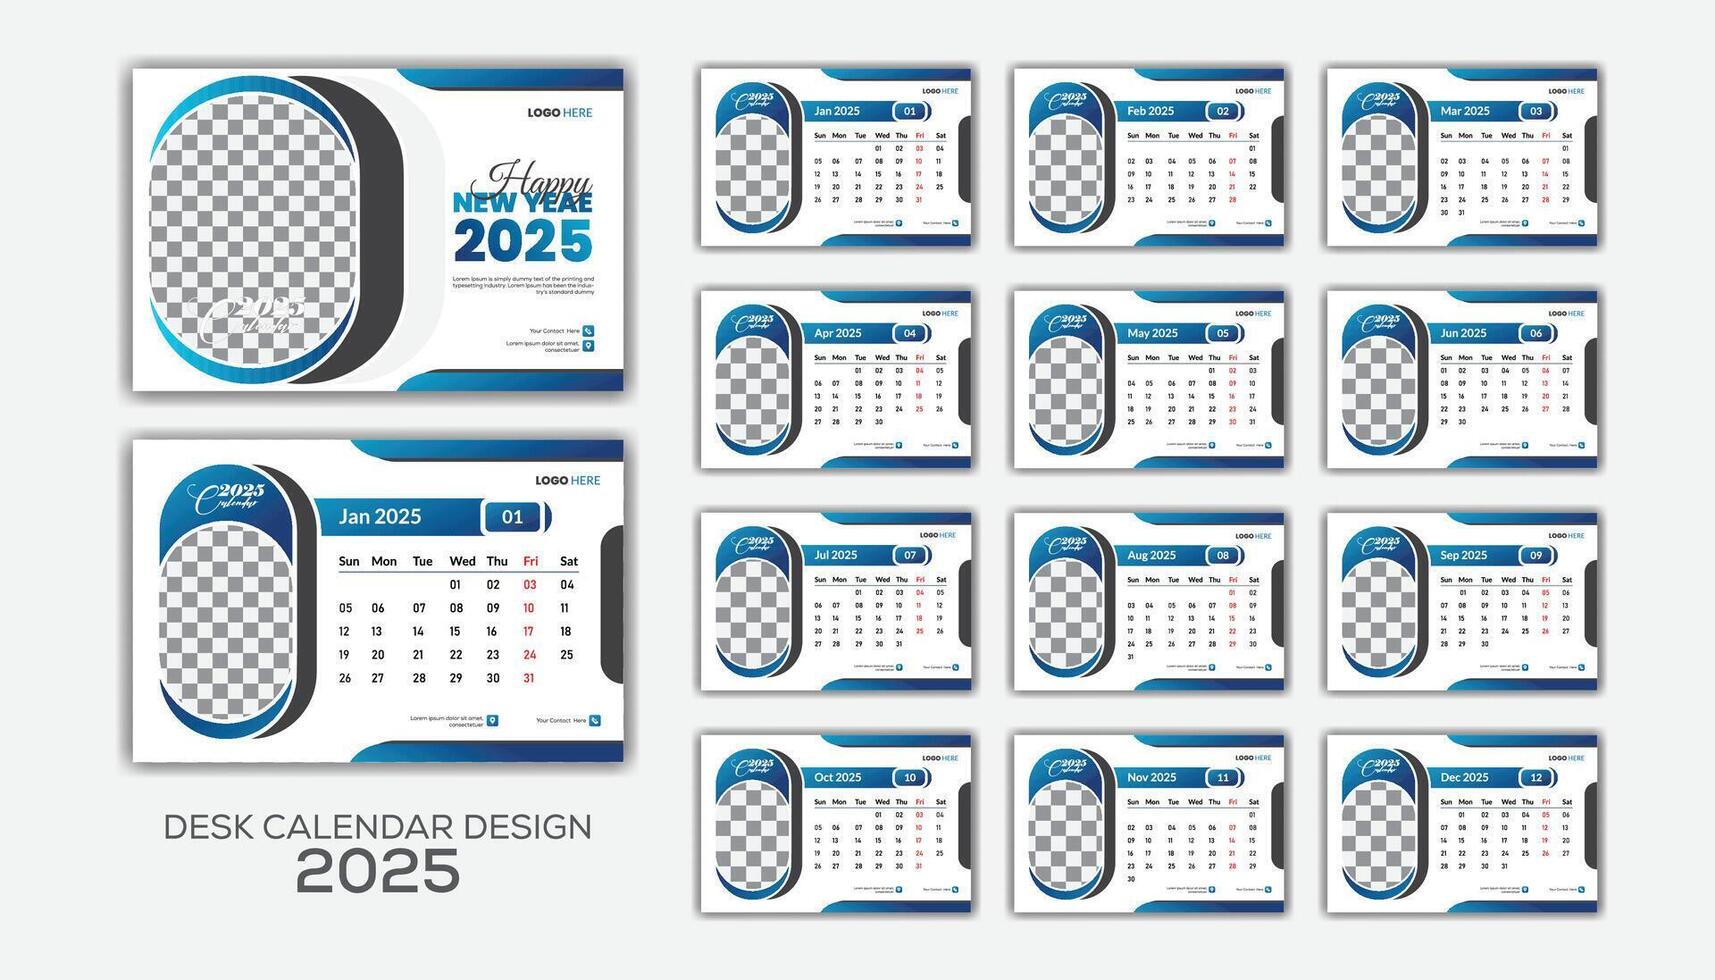 Desk Calendar Template for 2025 with 12 months vector